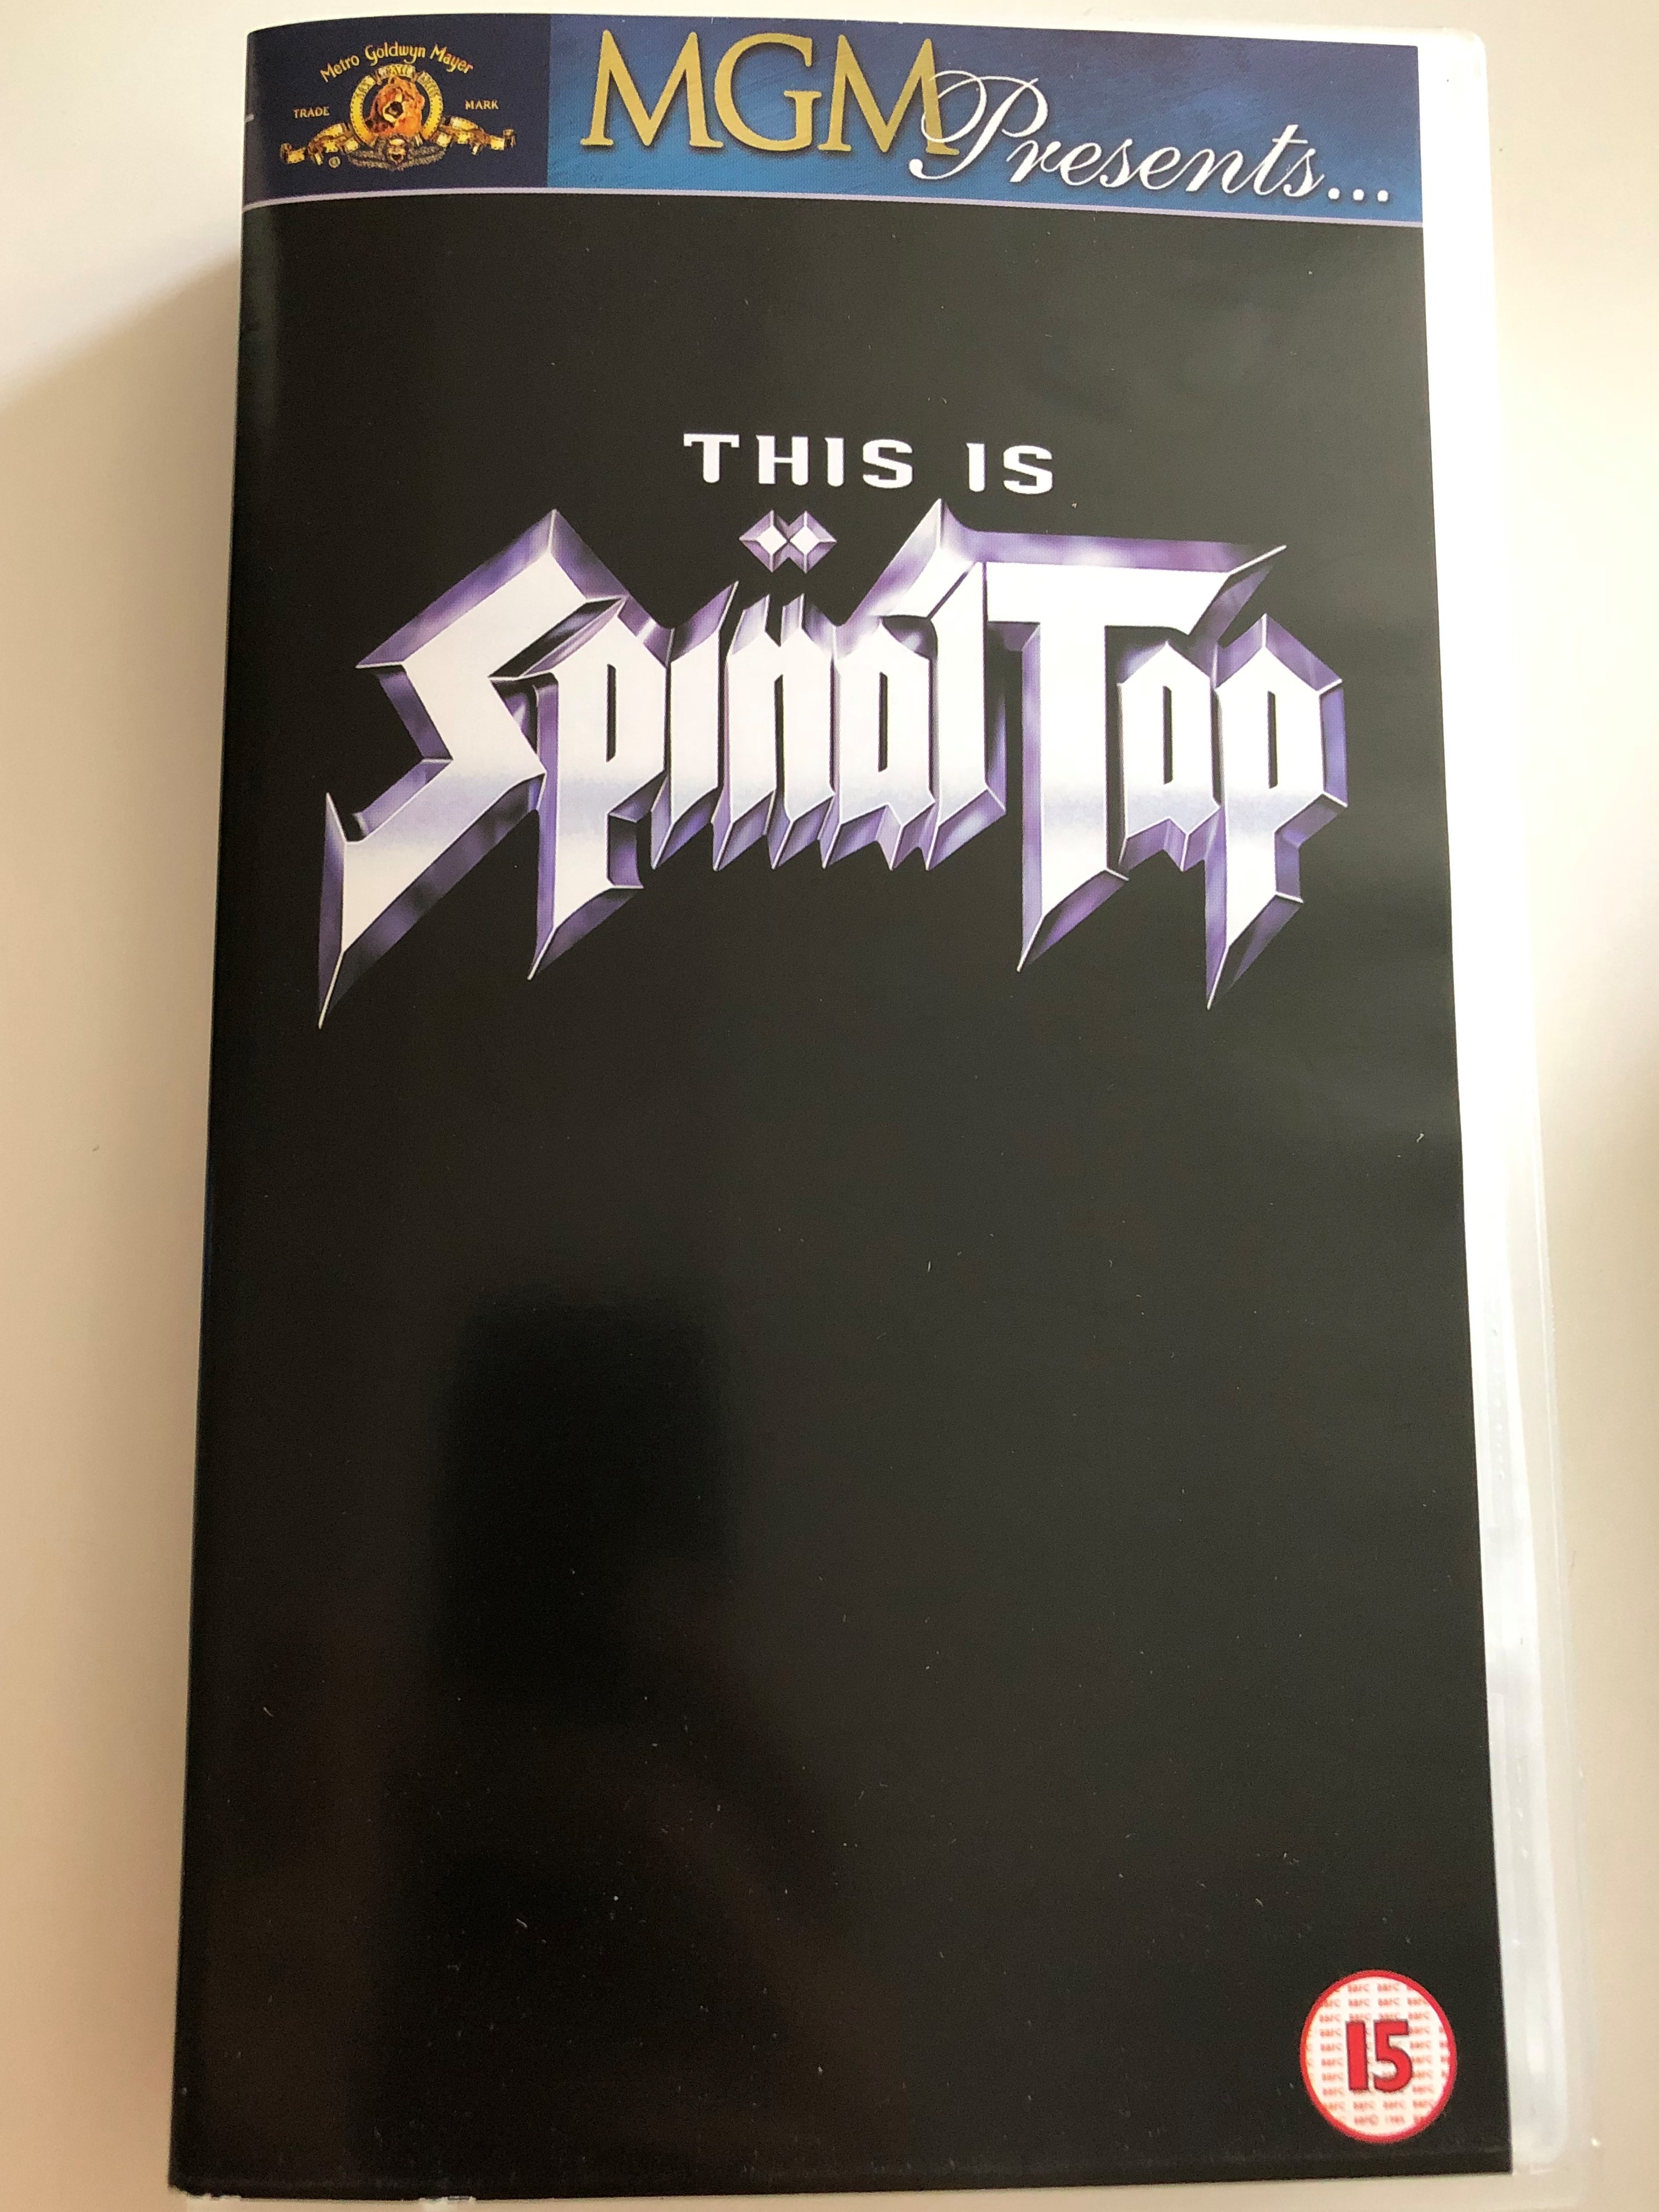 this-is-spinal-tap-vhs-1984-directed-by-rob-reiner-starring-christopher-guest-michael-mckean-harry-shearer-rob-reiner-june-chadwick-tony-hendra-bruno-kirby-the-funniest-movie-ever-made-about-rock-and-roll-1-.jpg